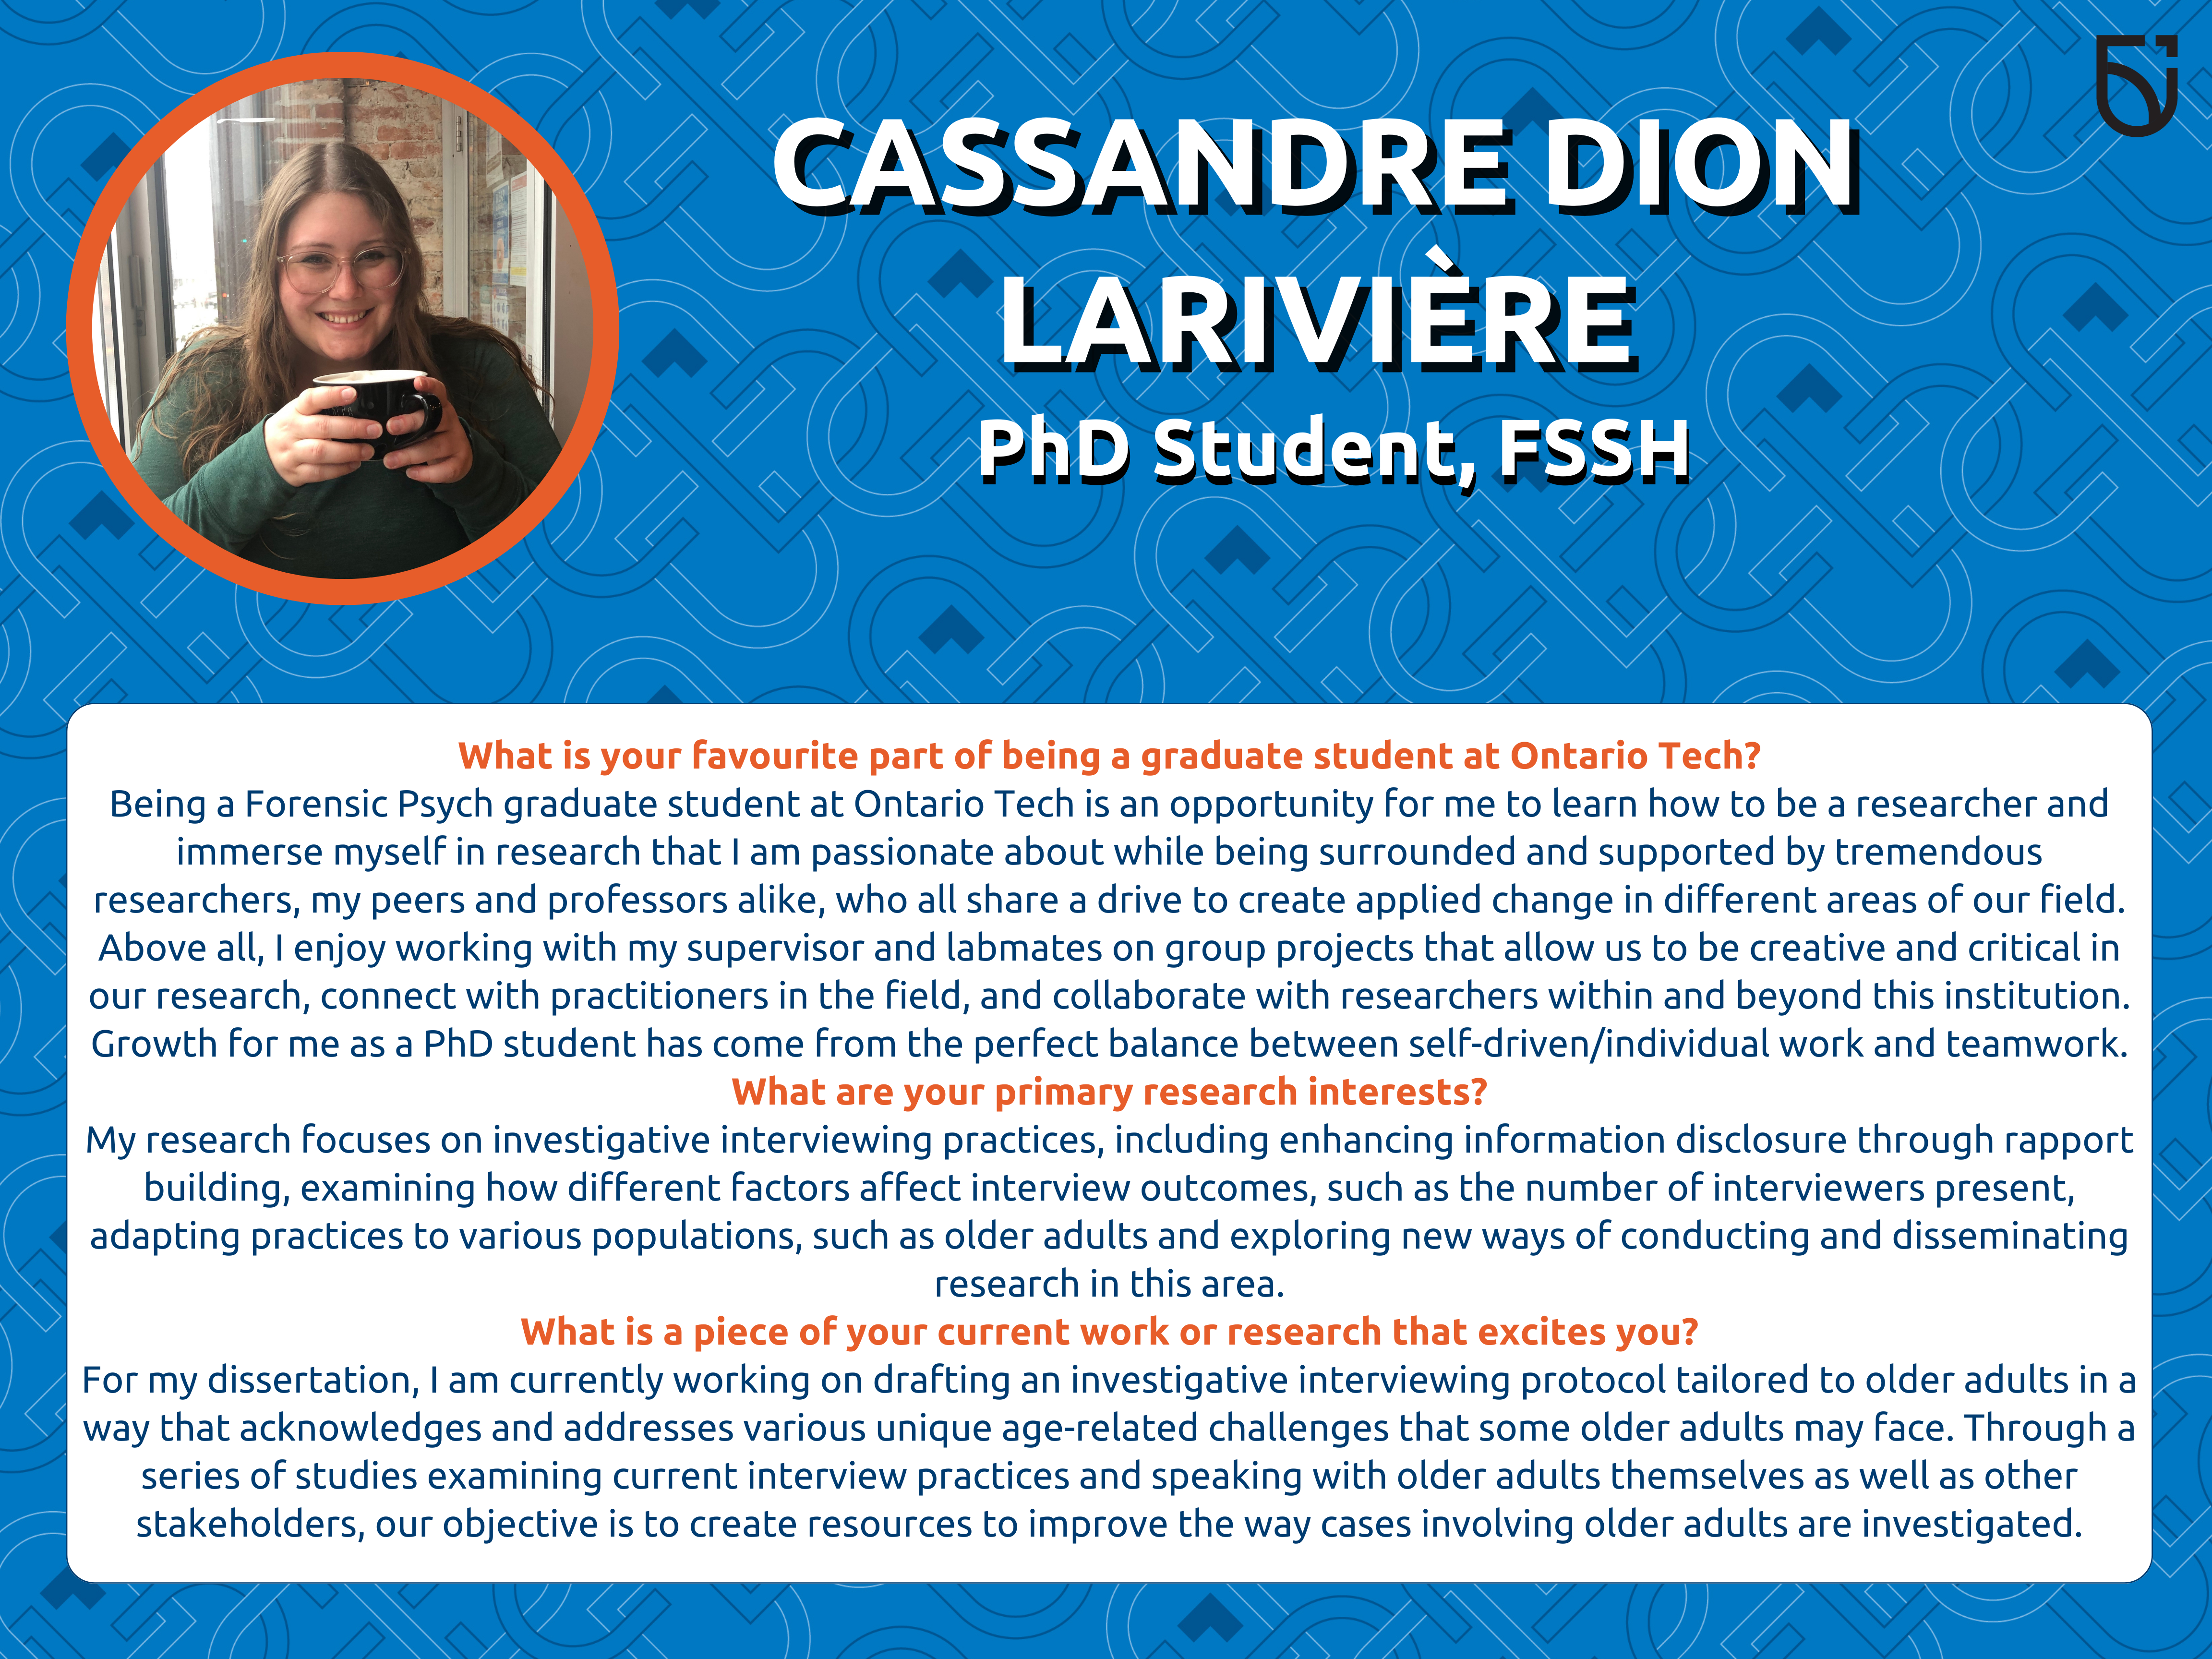 This photo is a Women’s Wednesday feature of Cassandre Dion Larivière, a PhD student in the Faculty of Social Science and Humanities.